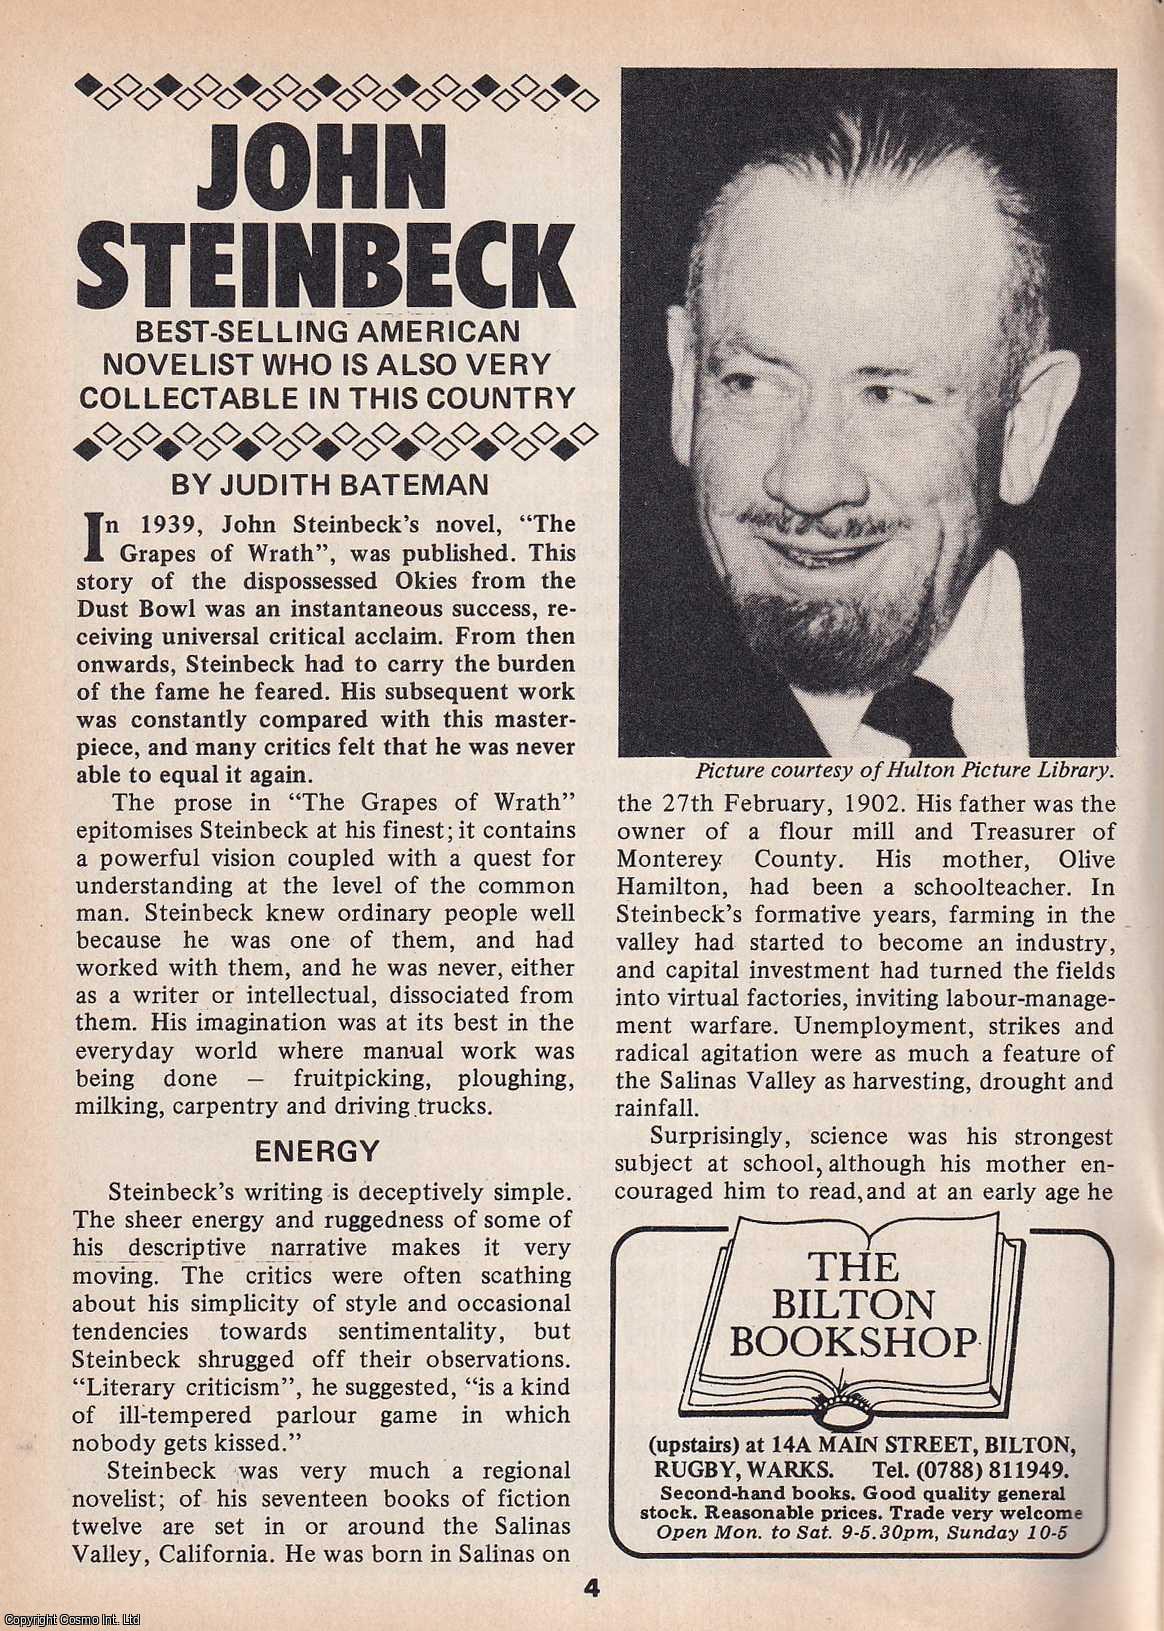 Judith Bateman - John Steinbeck. Best-Selling American Novelist. This is an original article separated from an issue of The Book & Magazine Collector publication.